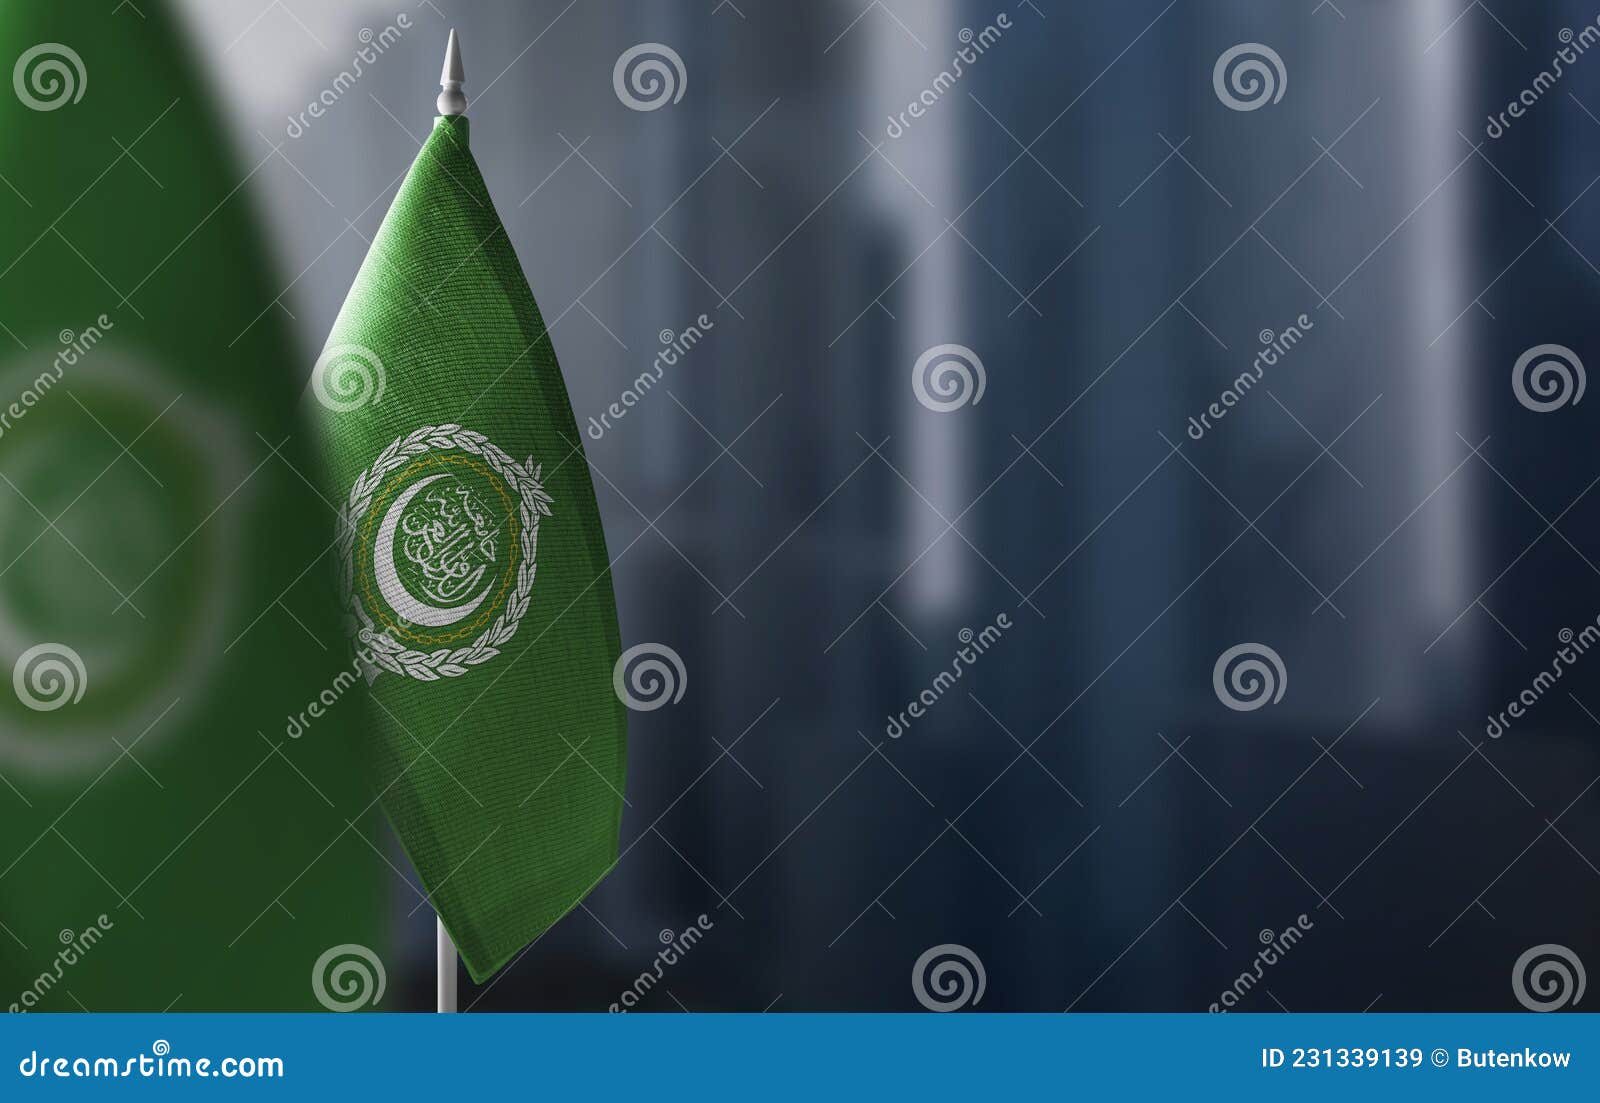 small flags of arab league on a blurry background of the city